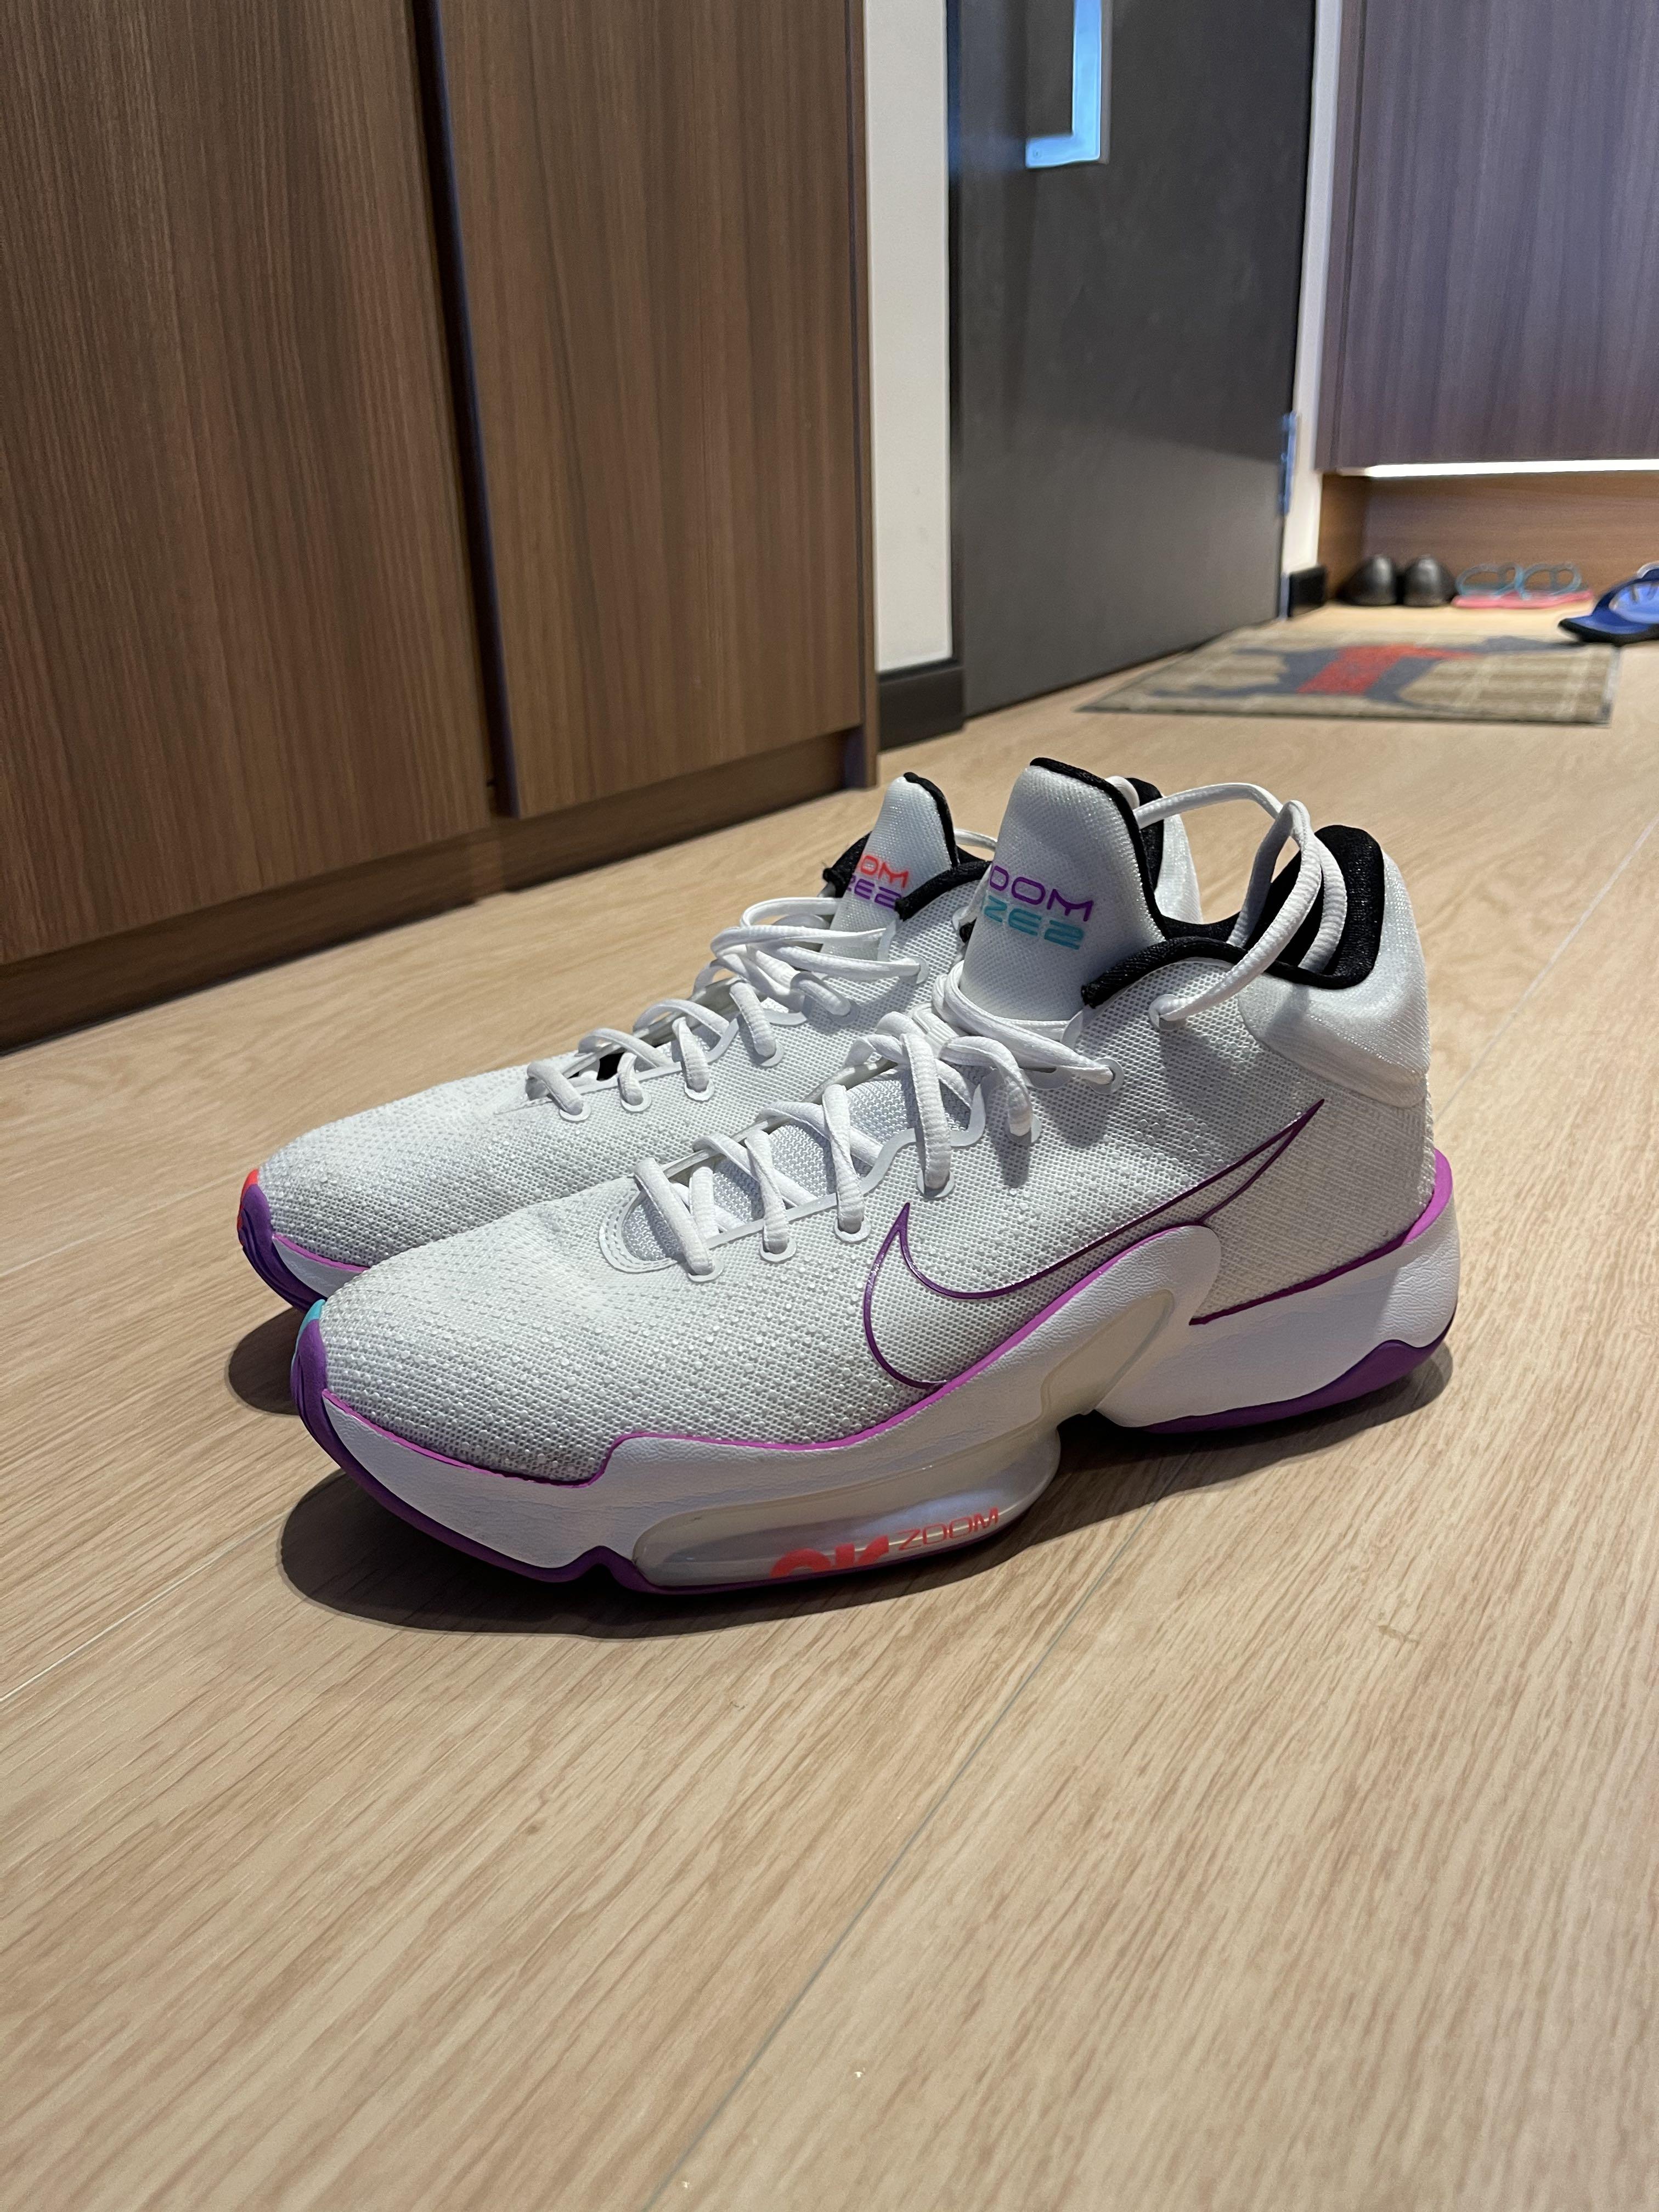 NIKE ZOOM RIZE 29cm ズームライズ2 2